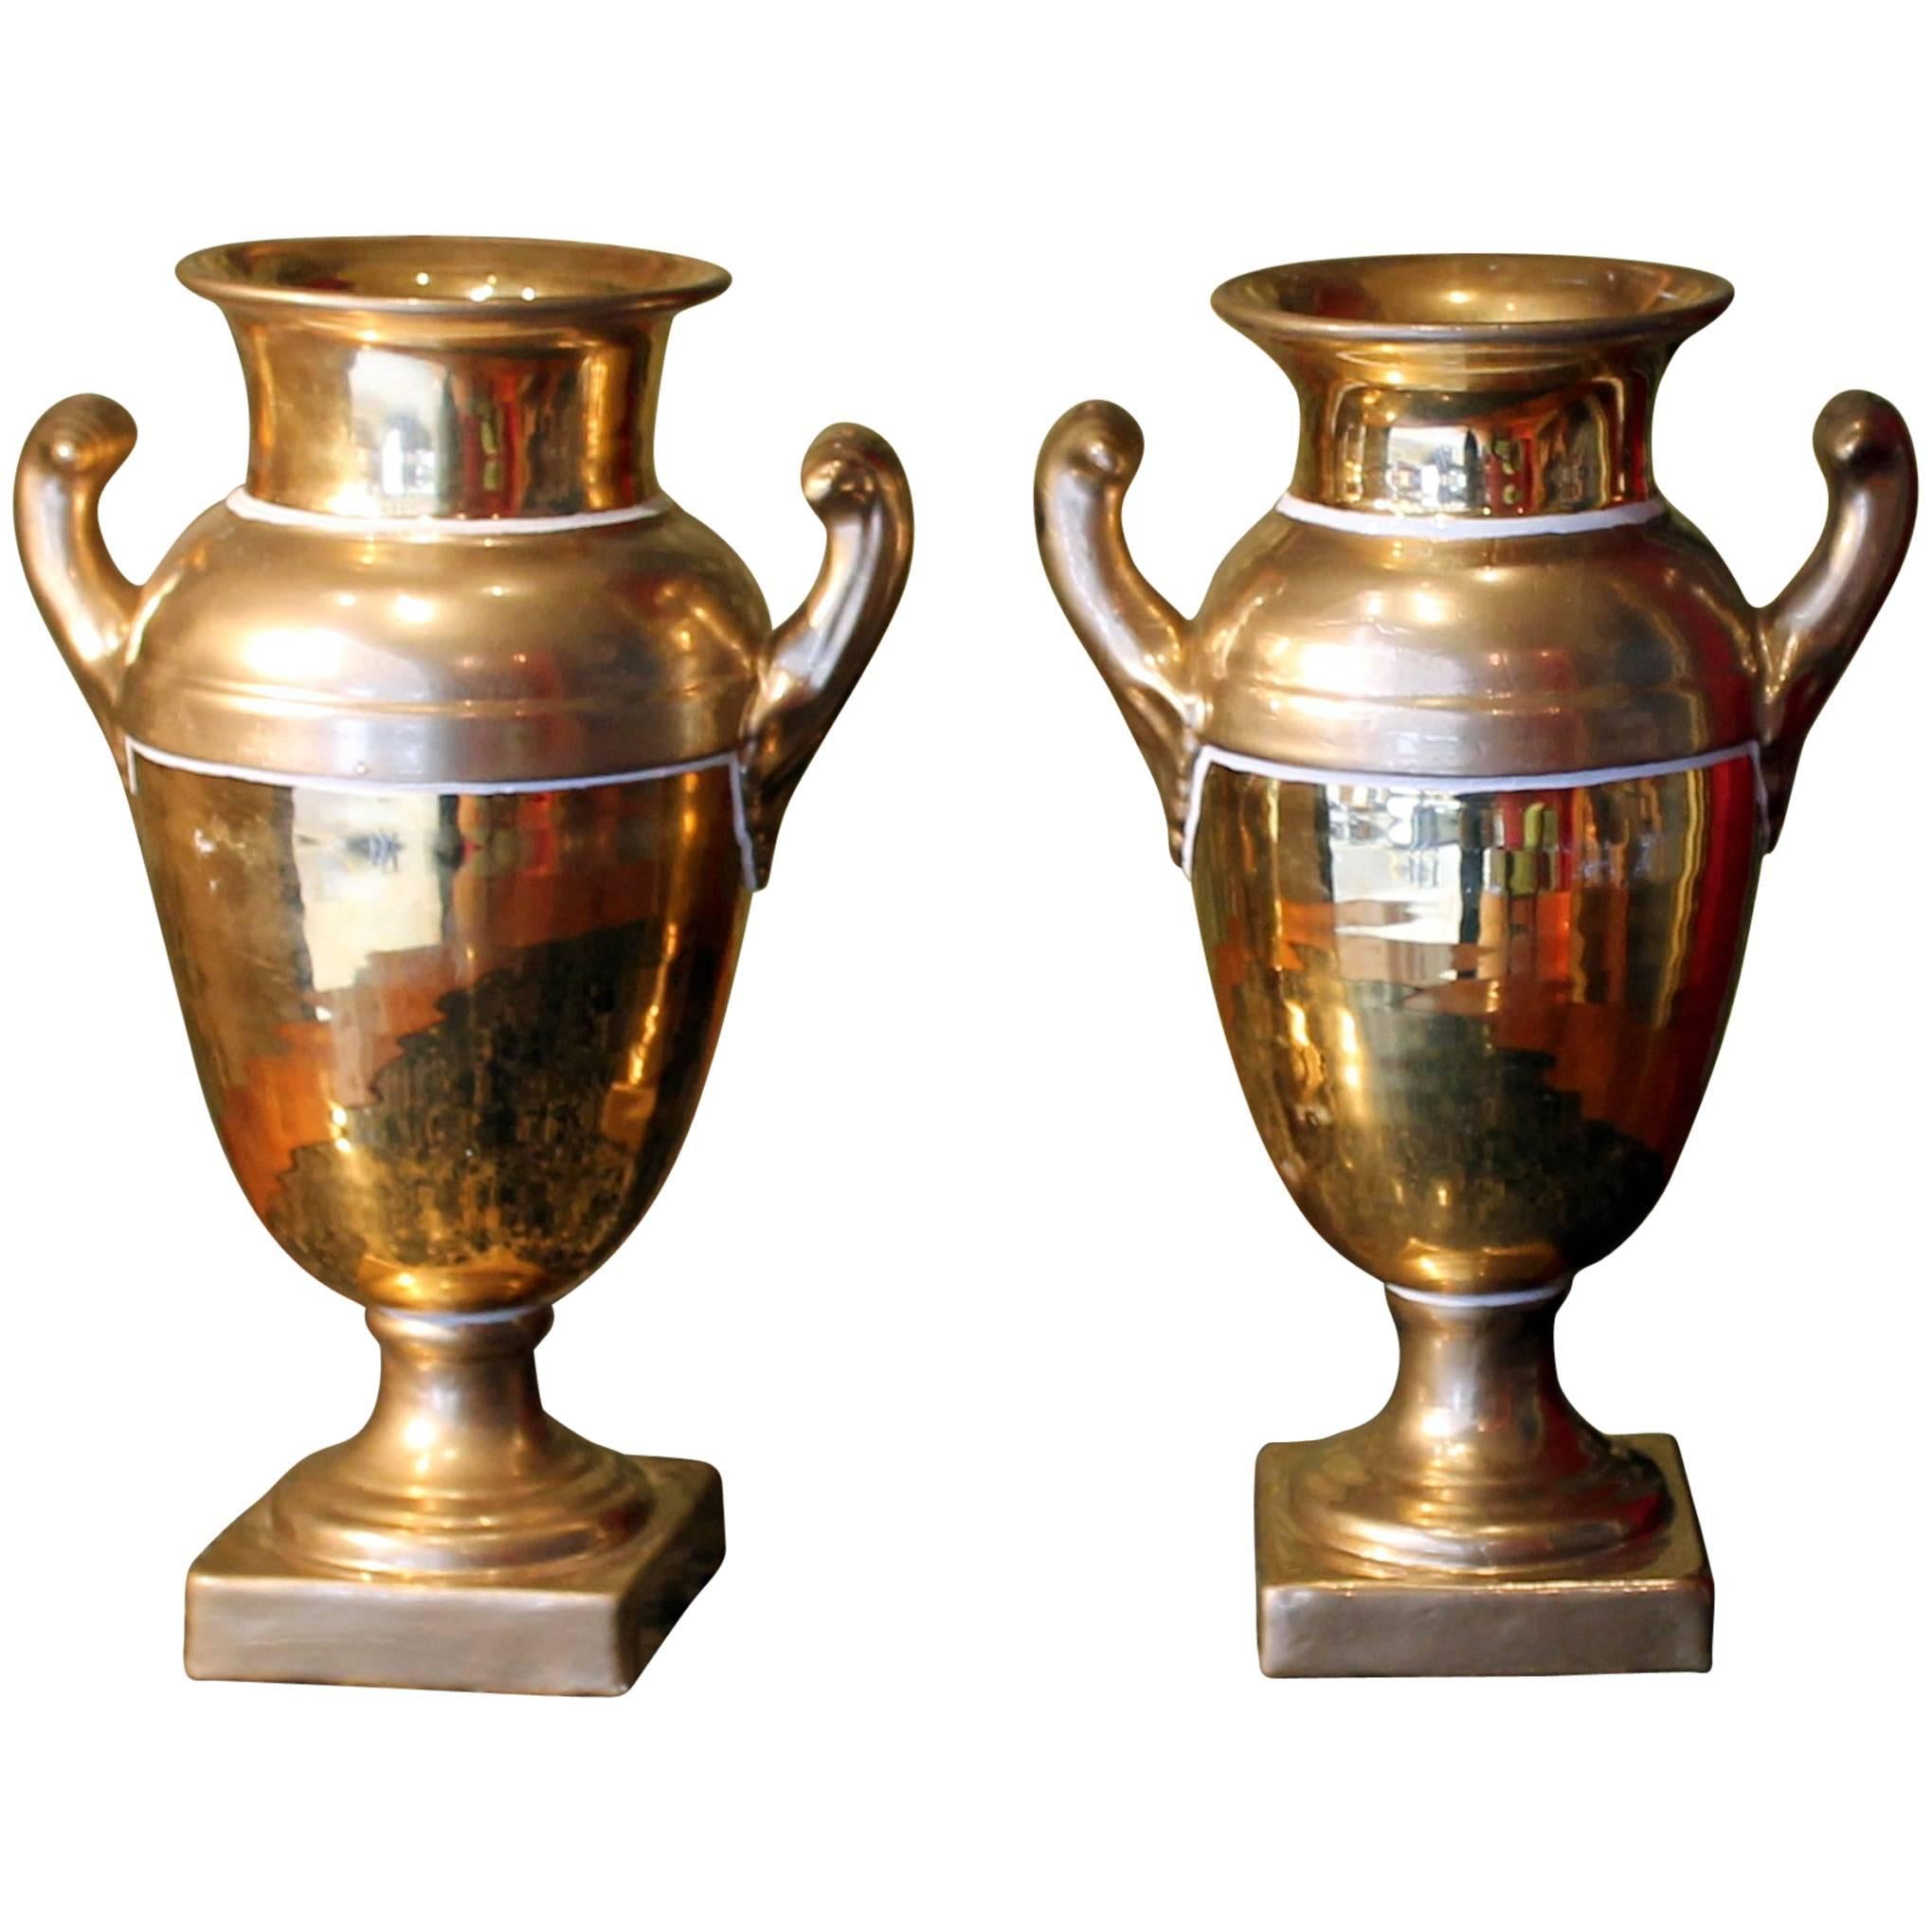 Pair of French Empire Period Matte and Burnished Gilt Porcelain Vases For Sale